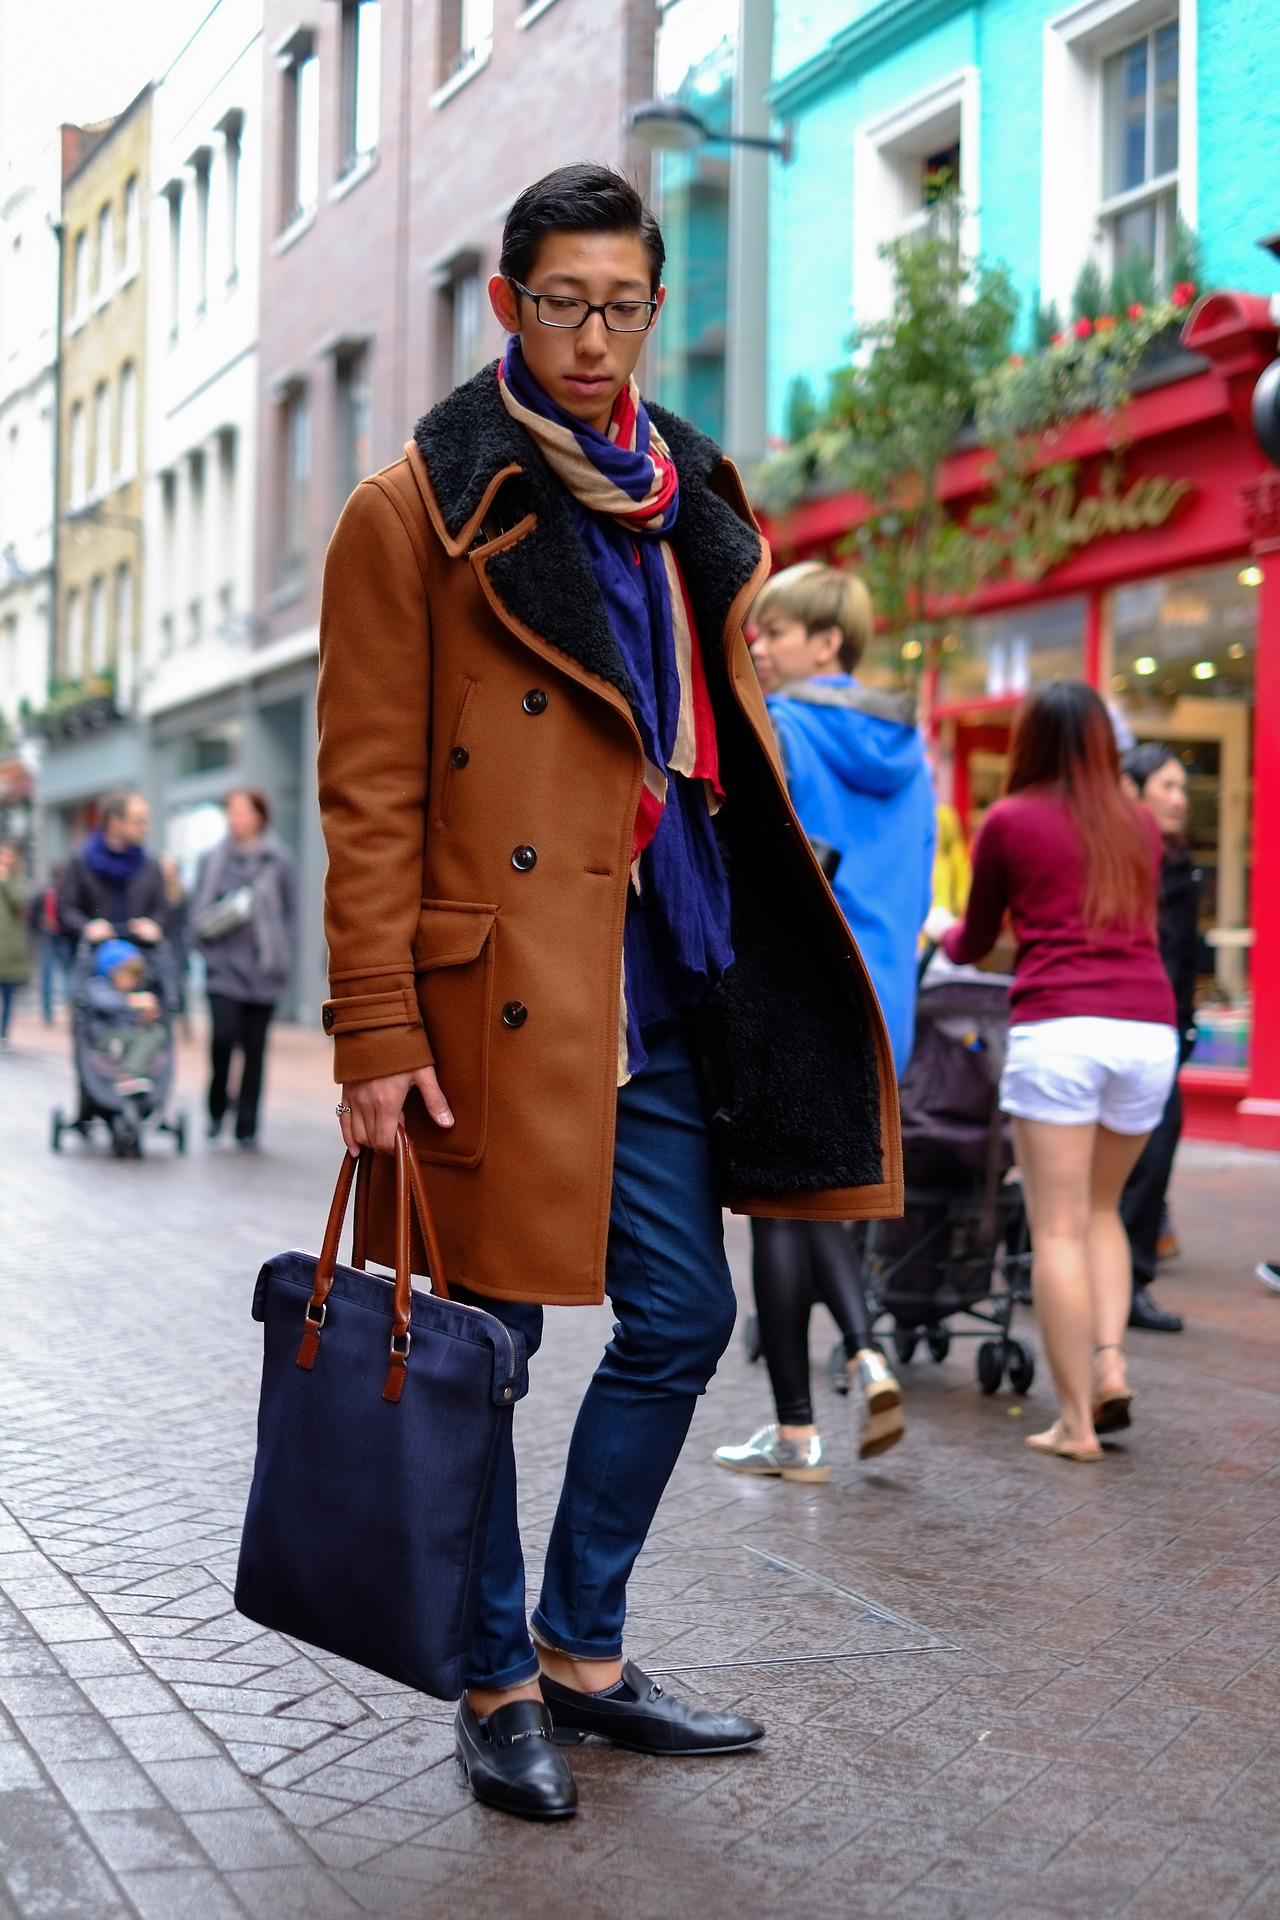 Style Overload ankle socks x shearling coat x canvas bag